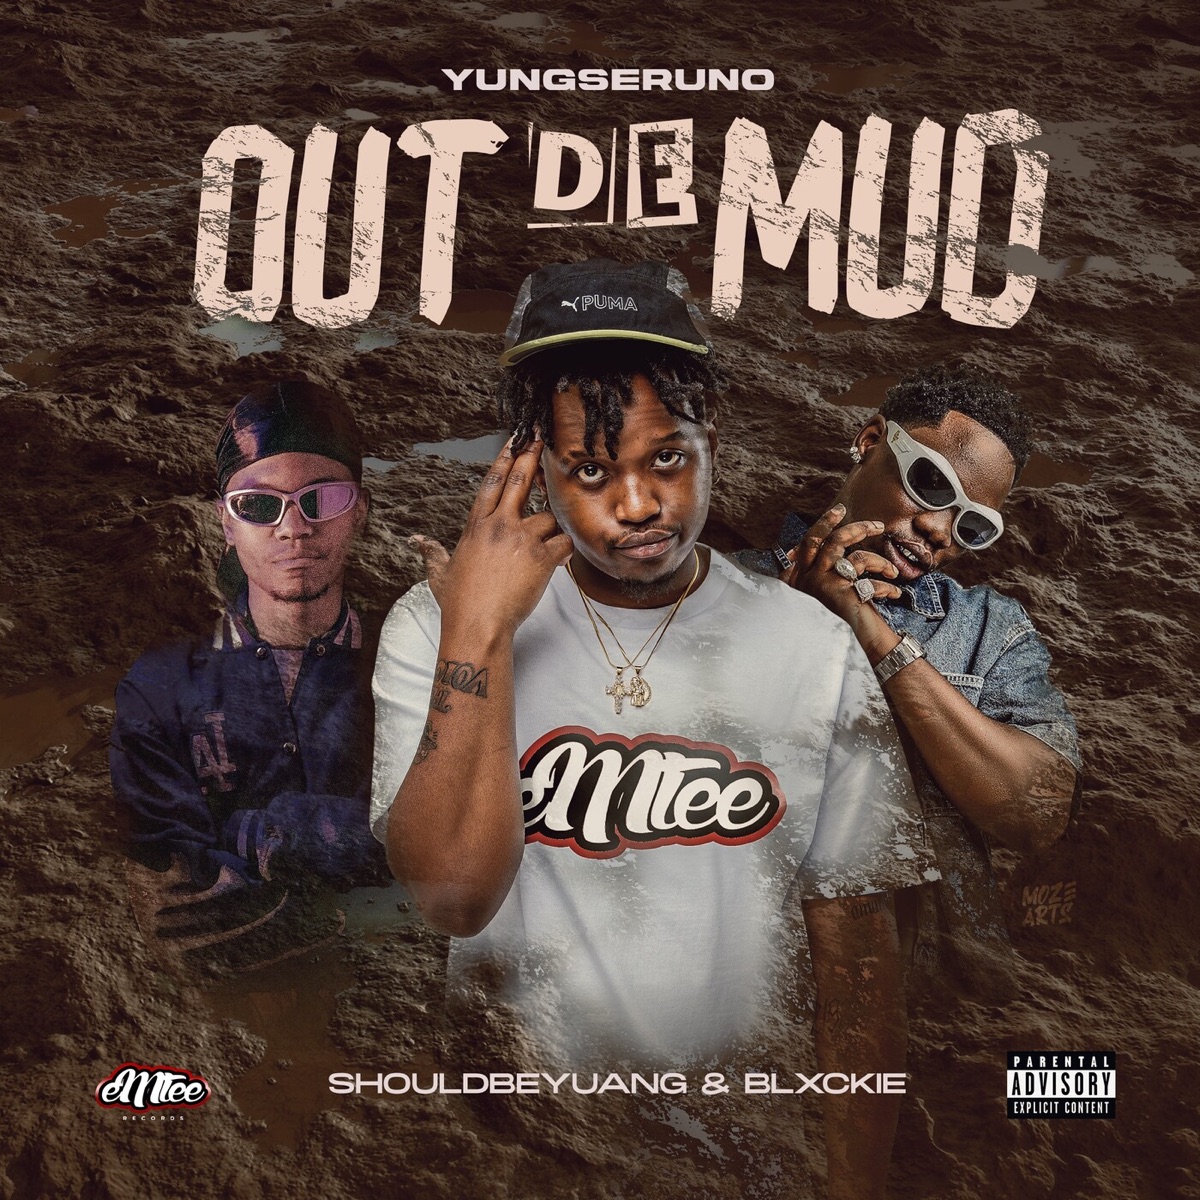 Yungseruno - Out De Mud (Feat. Shouldbeyuang &Amp; Blxckie) 1